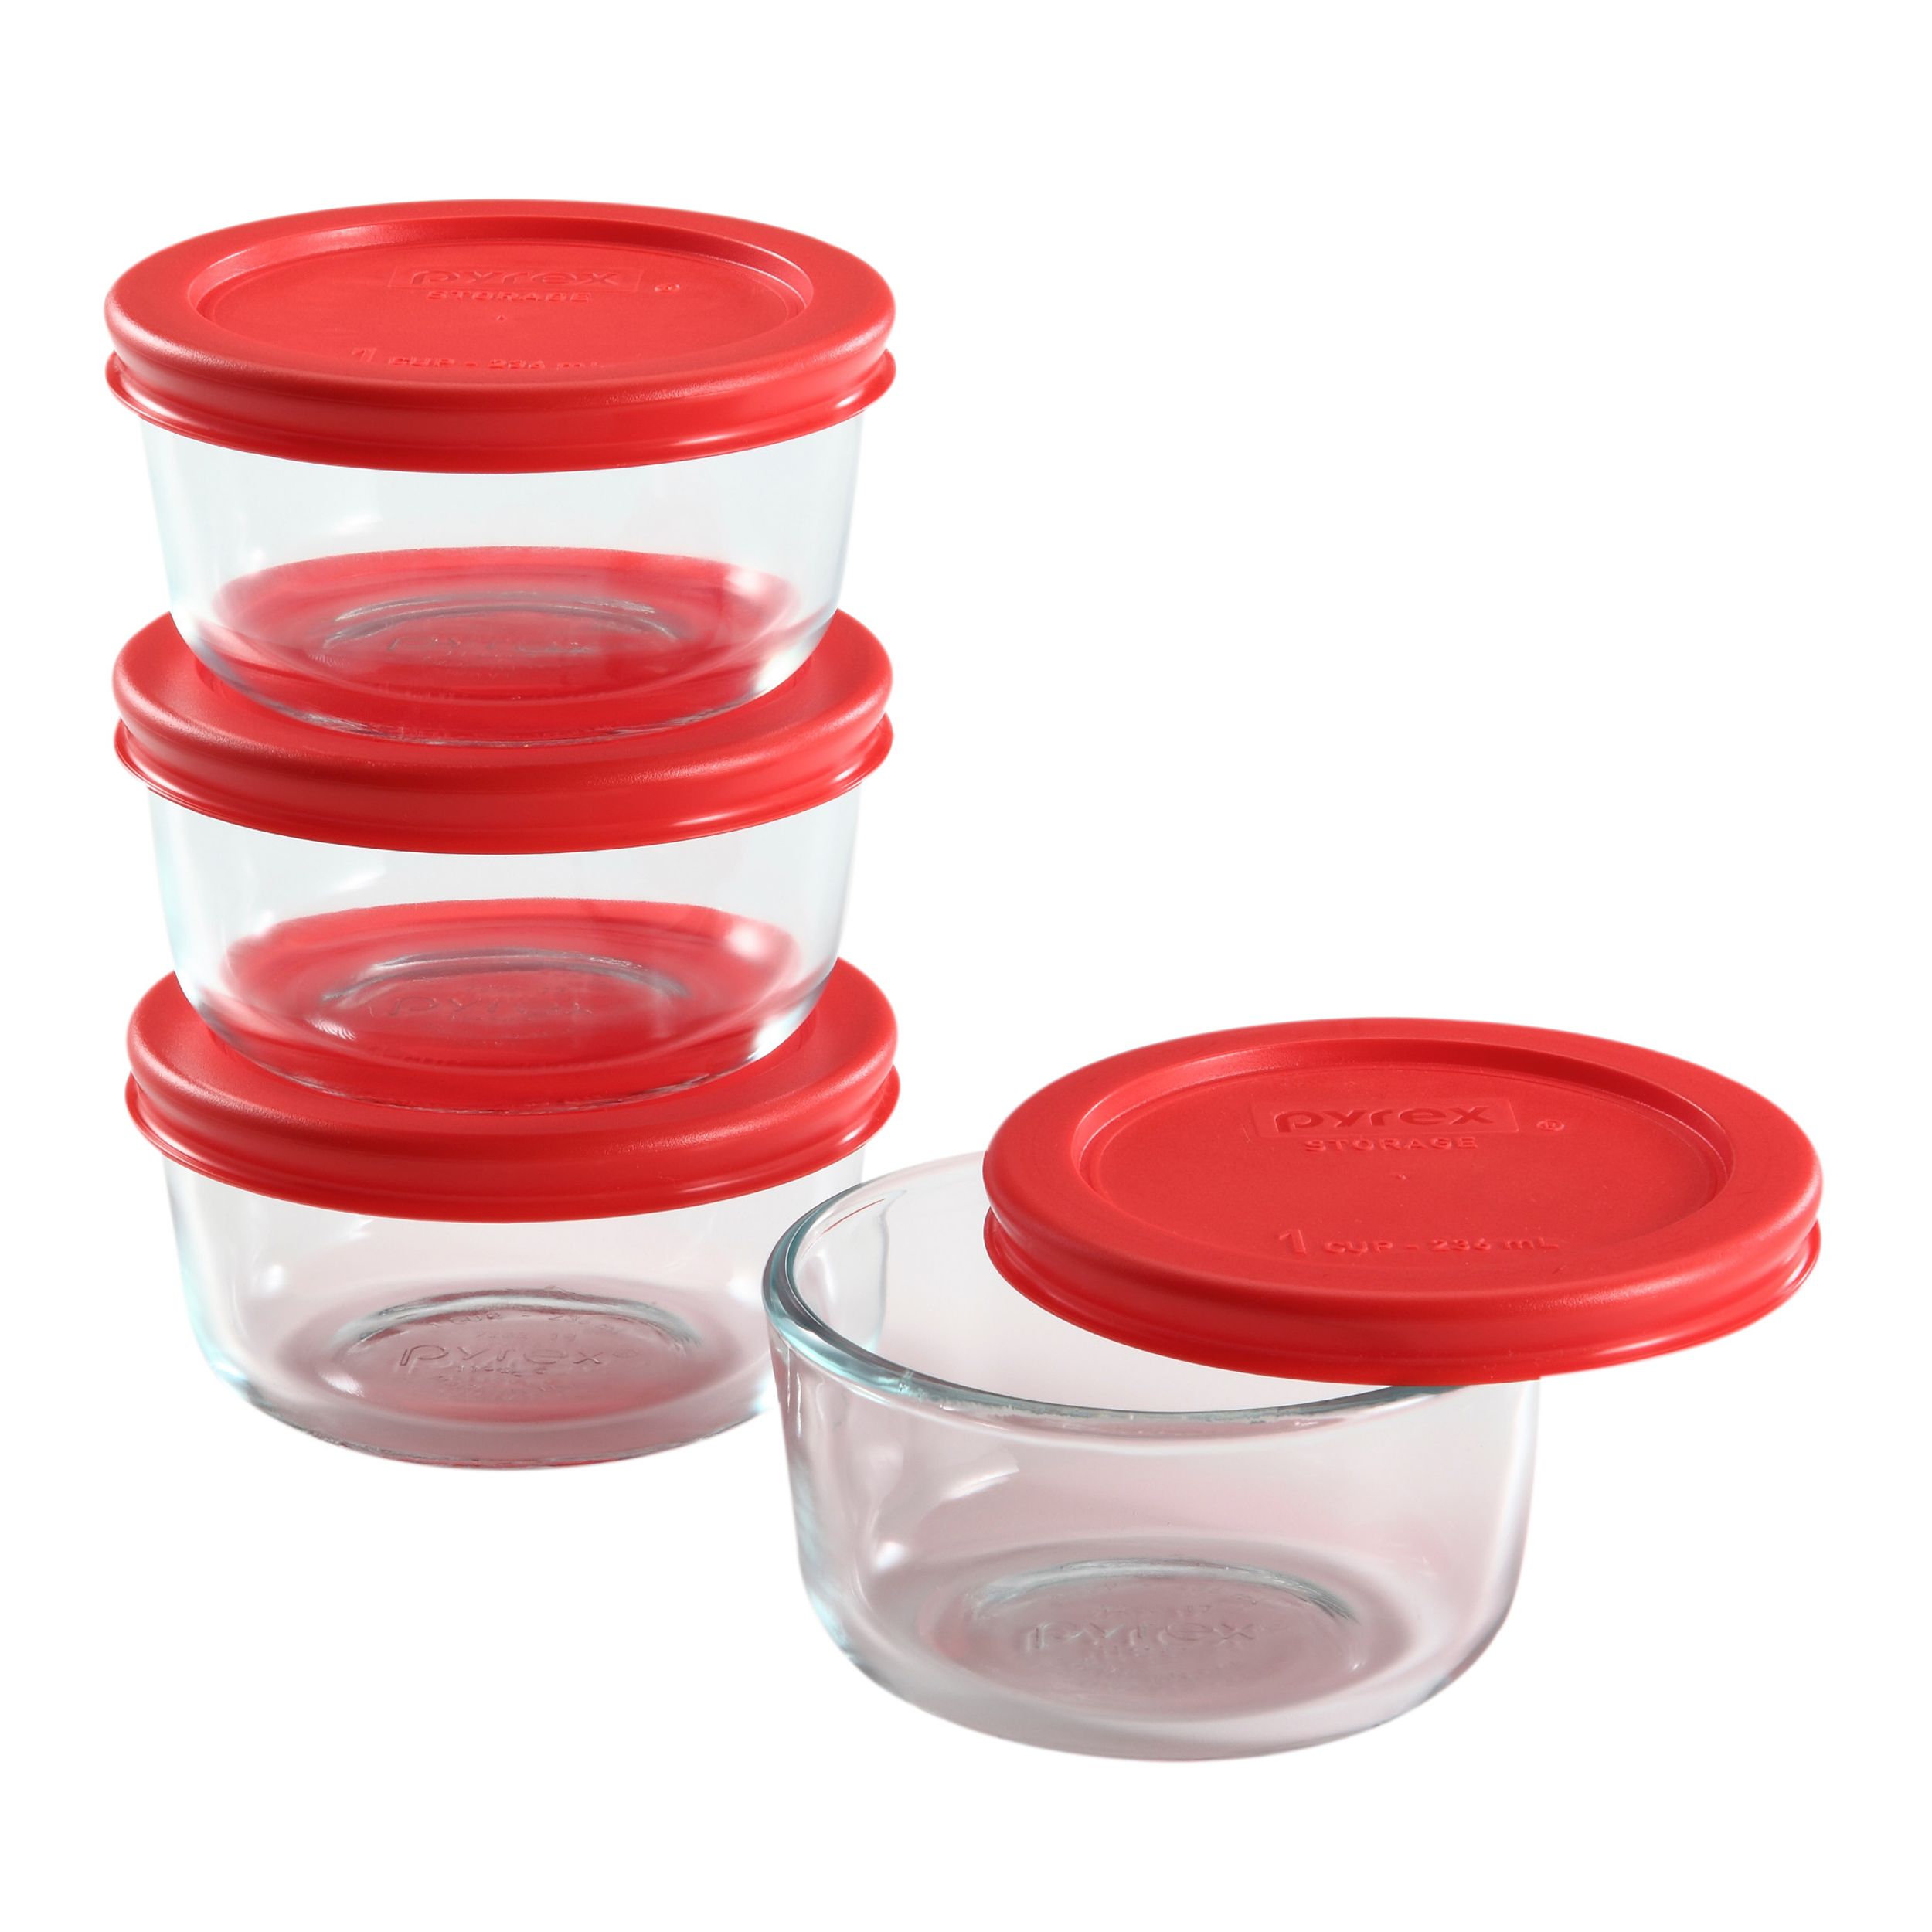 https://www.prepyoself.com/wp-content/uploads/2023/06/pyrex-best-meal-prep-containers.jpg